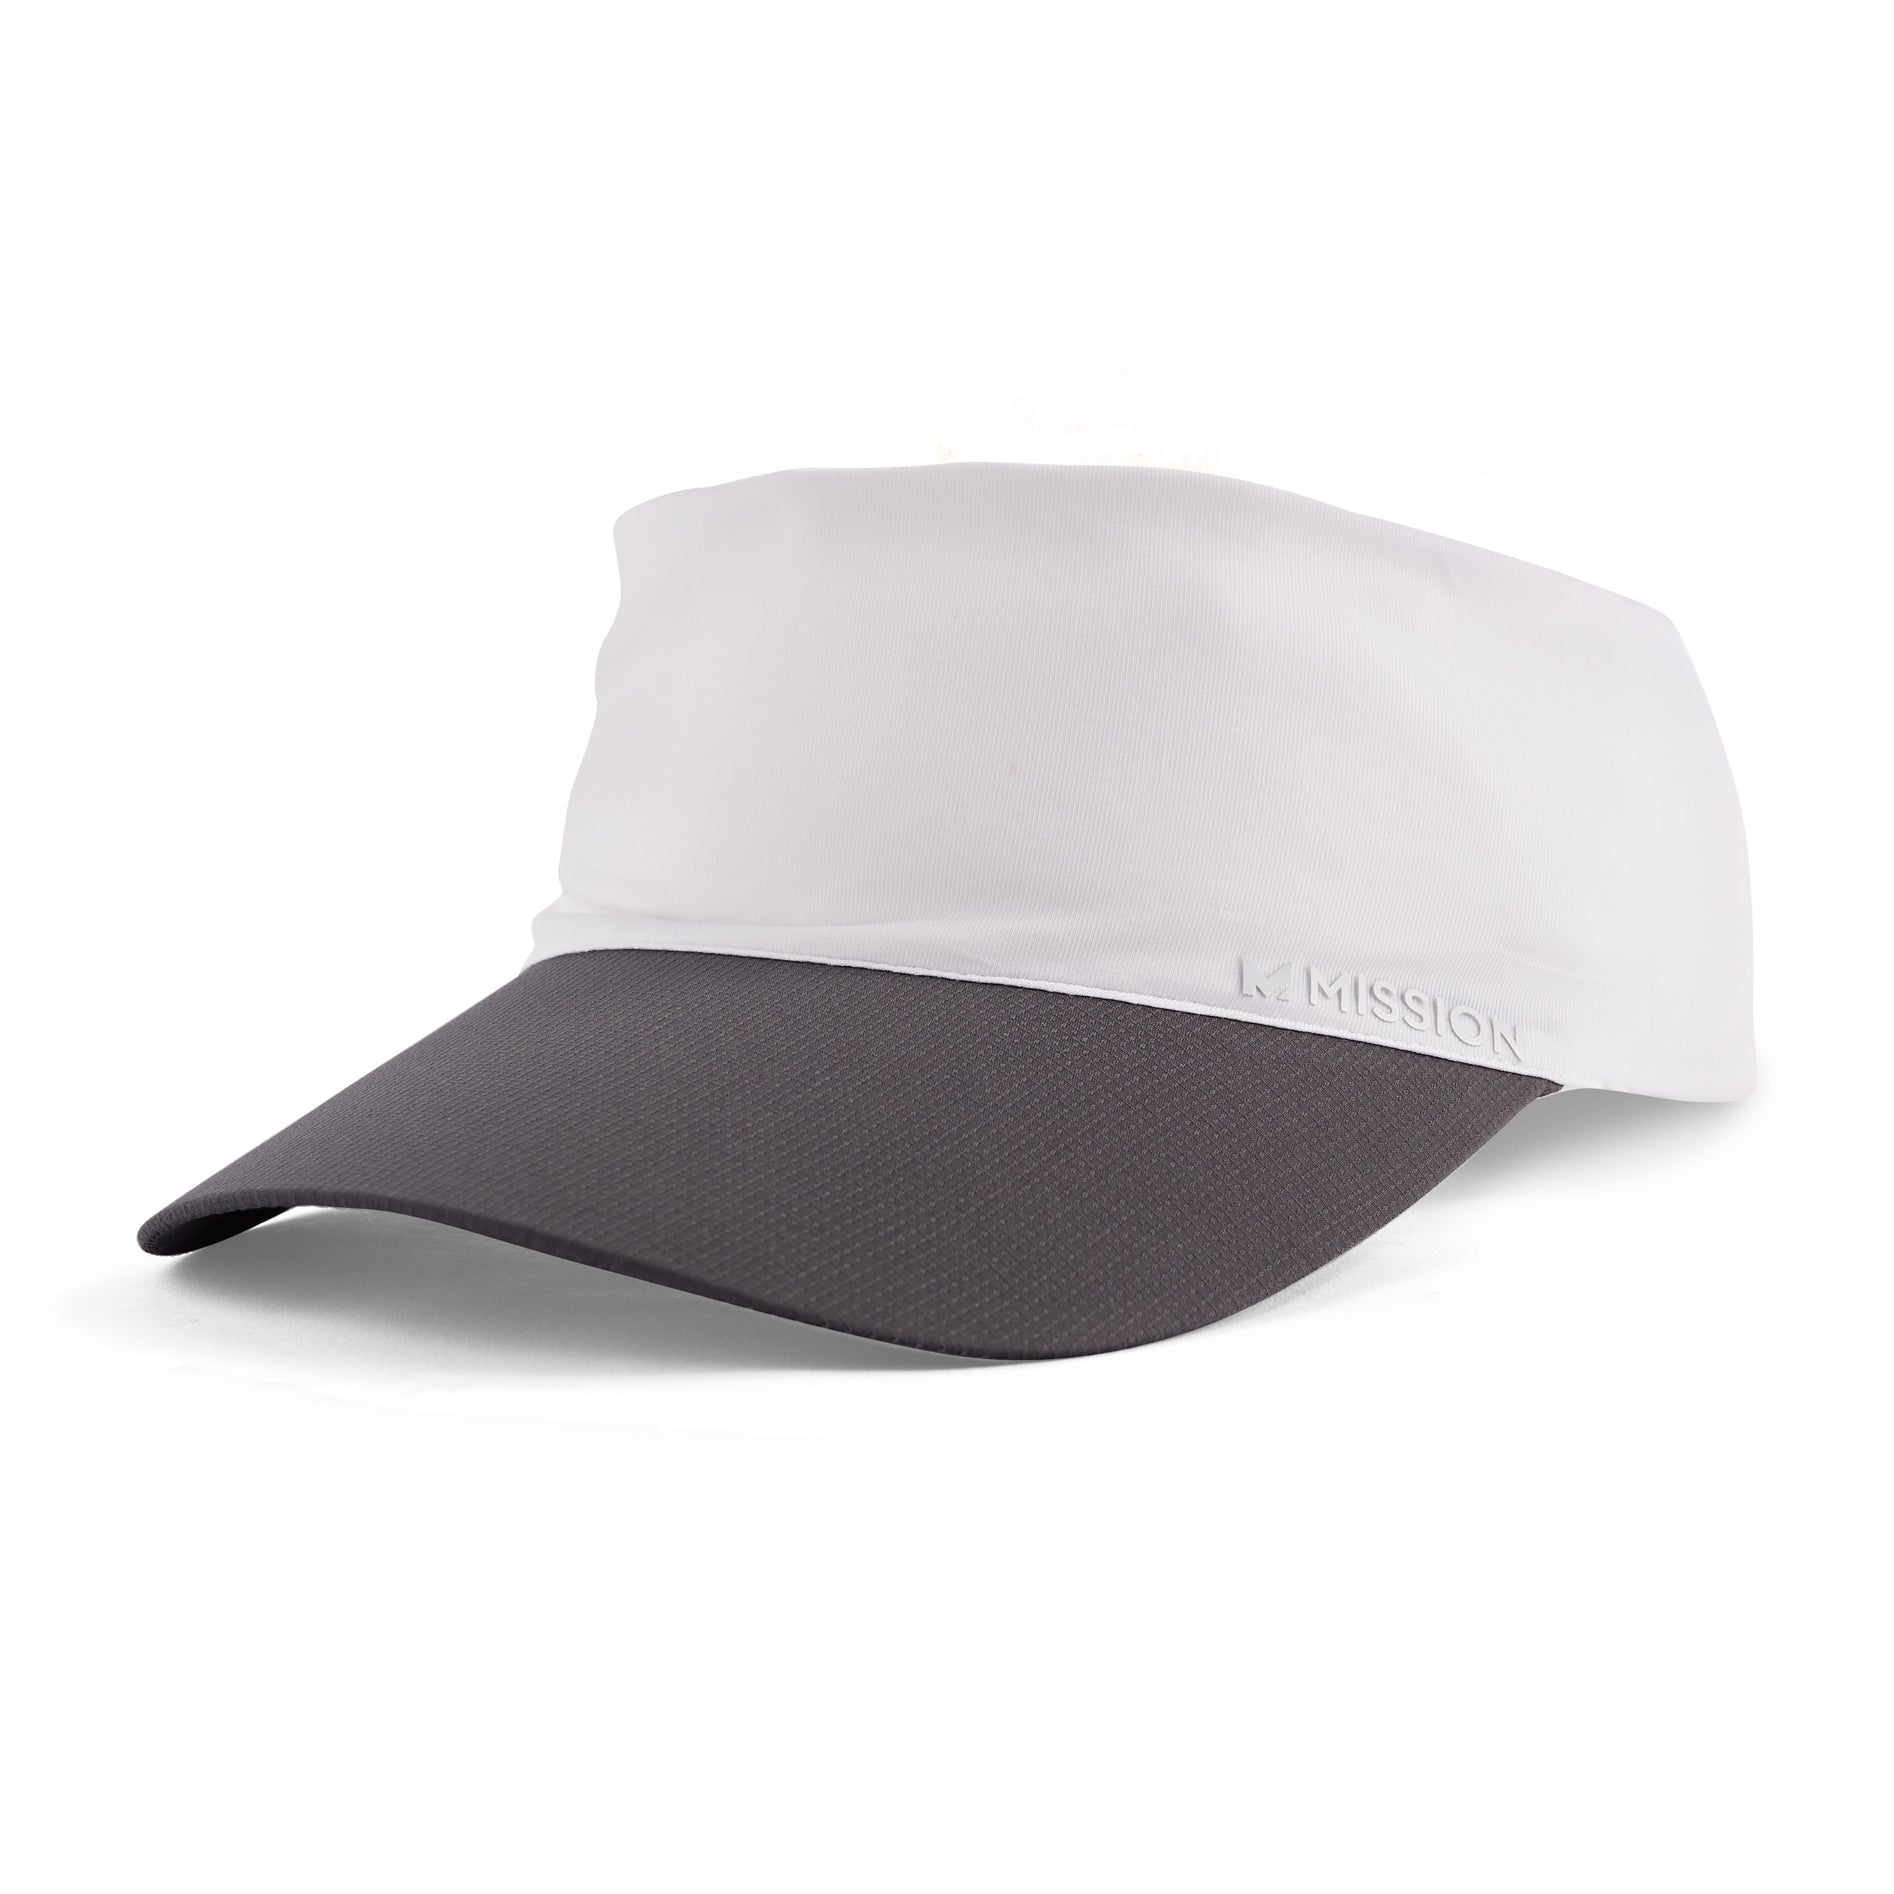 Cooling Visor Caps MISSION One Size White and Charcoal 